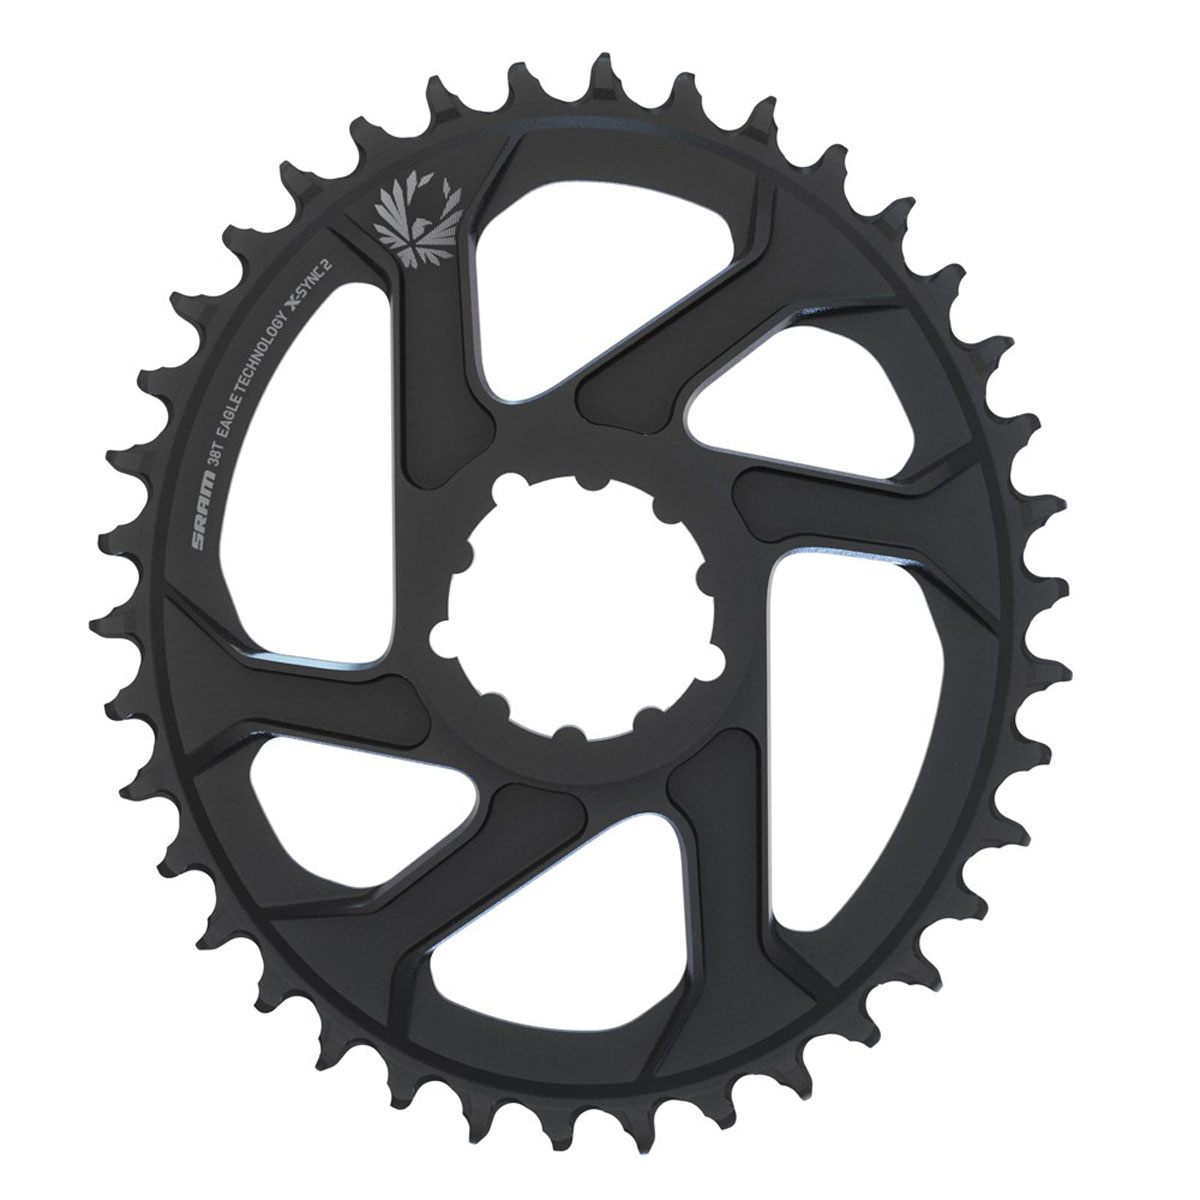 X-SYNC 2 Eagle™ Oval Chainring Direct Mount